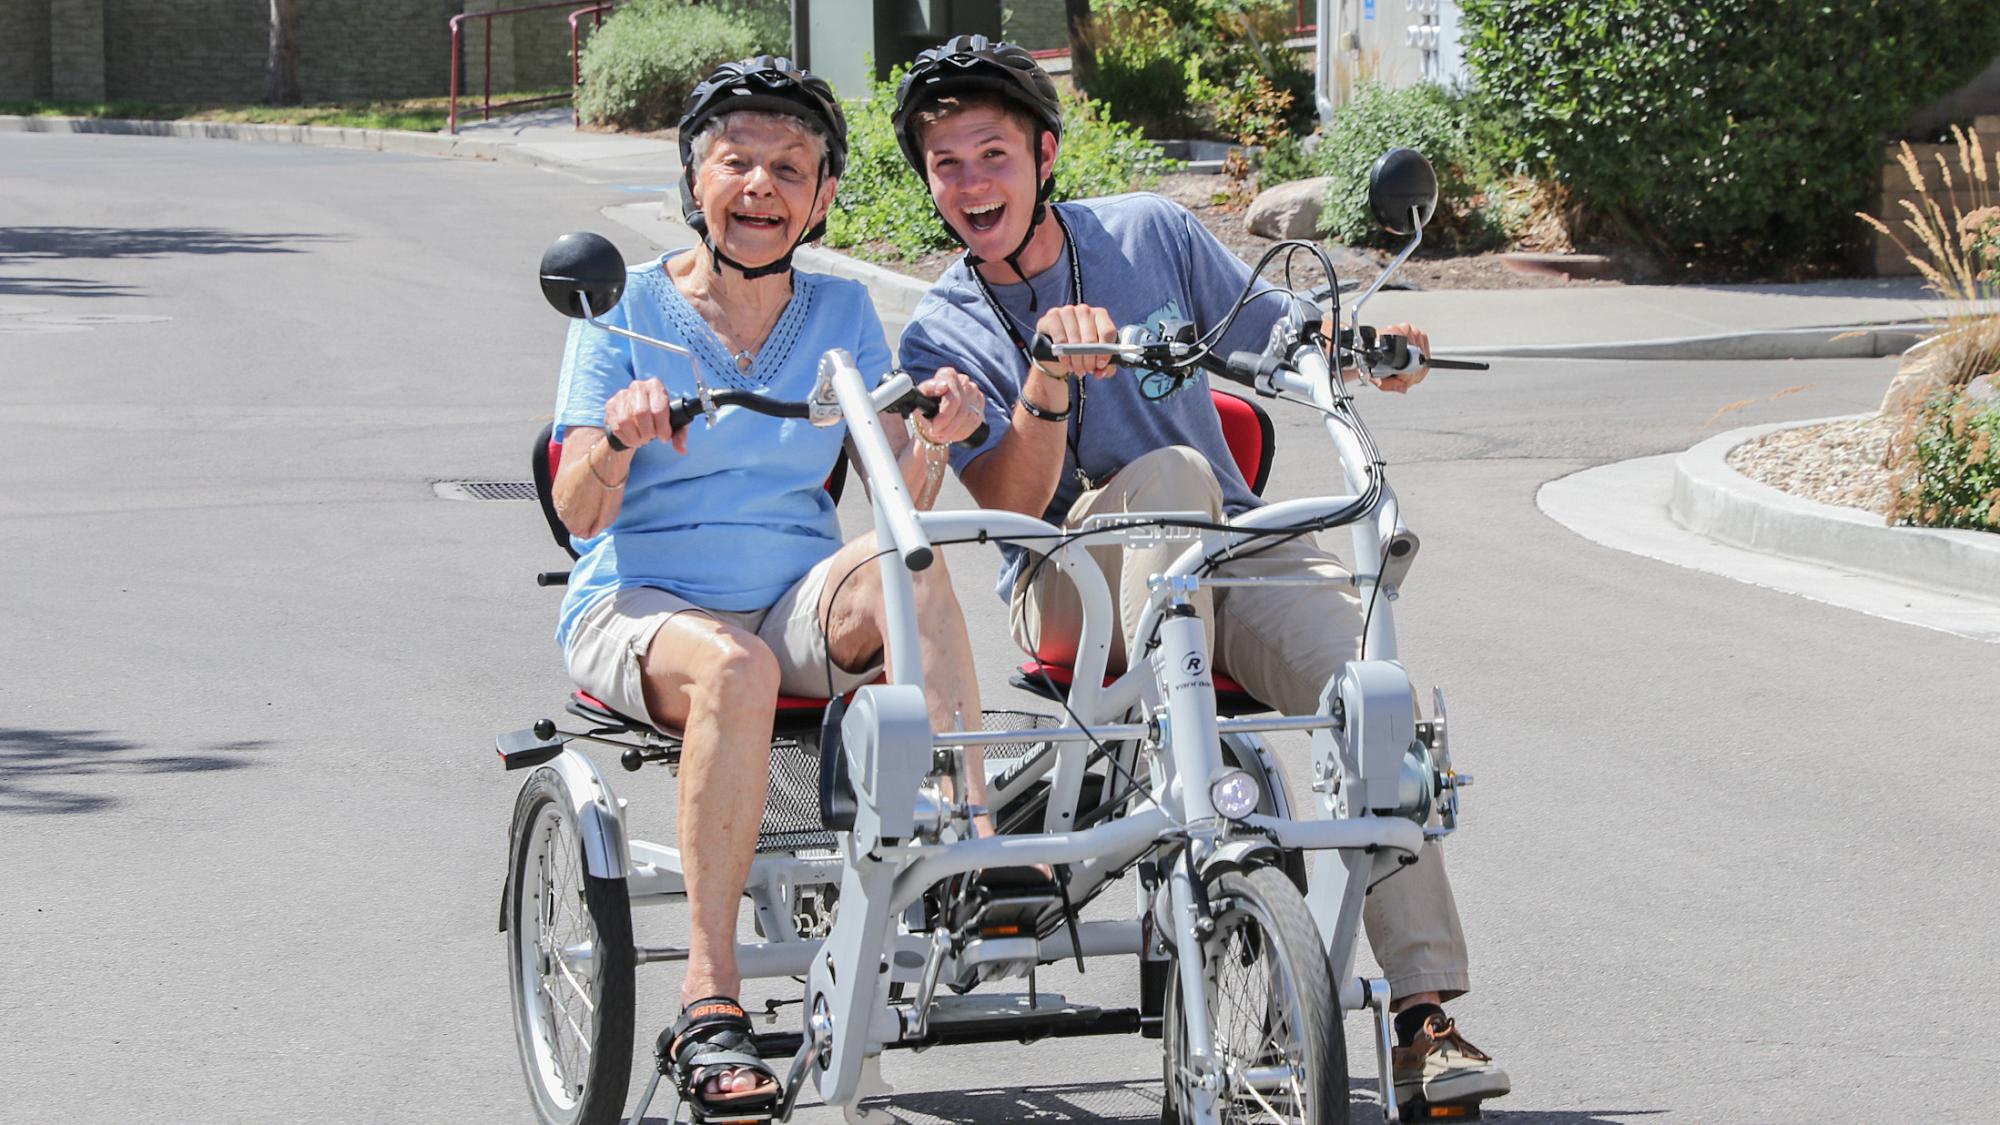 Older woman and man riding on a tandem bicycle